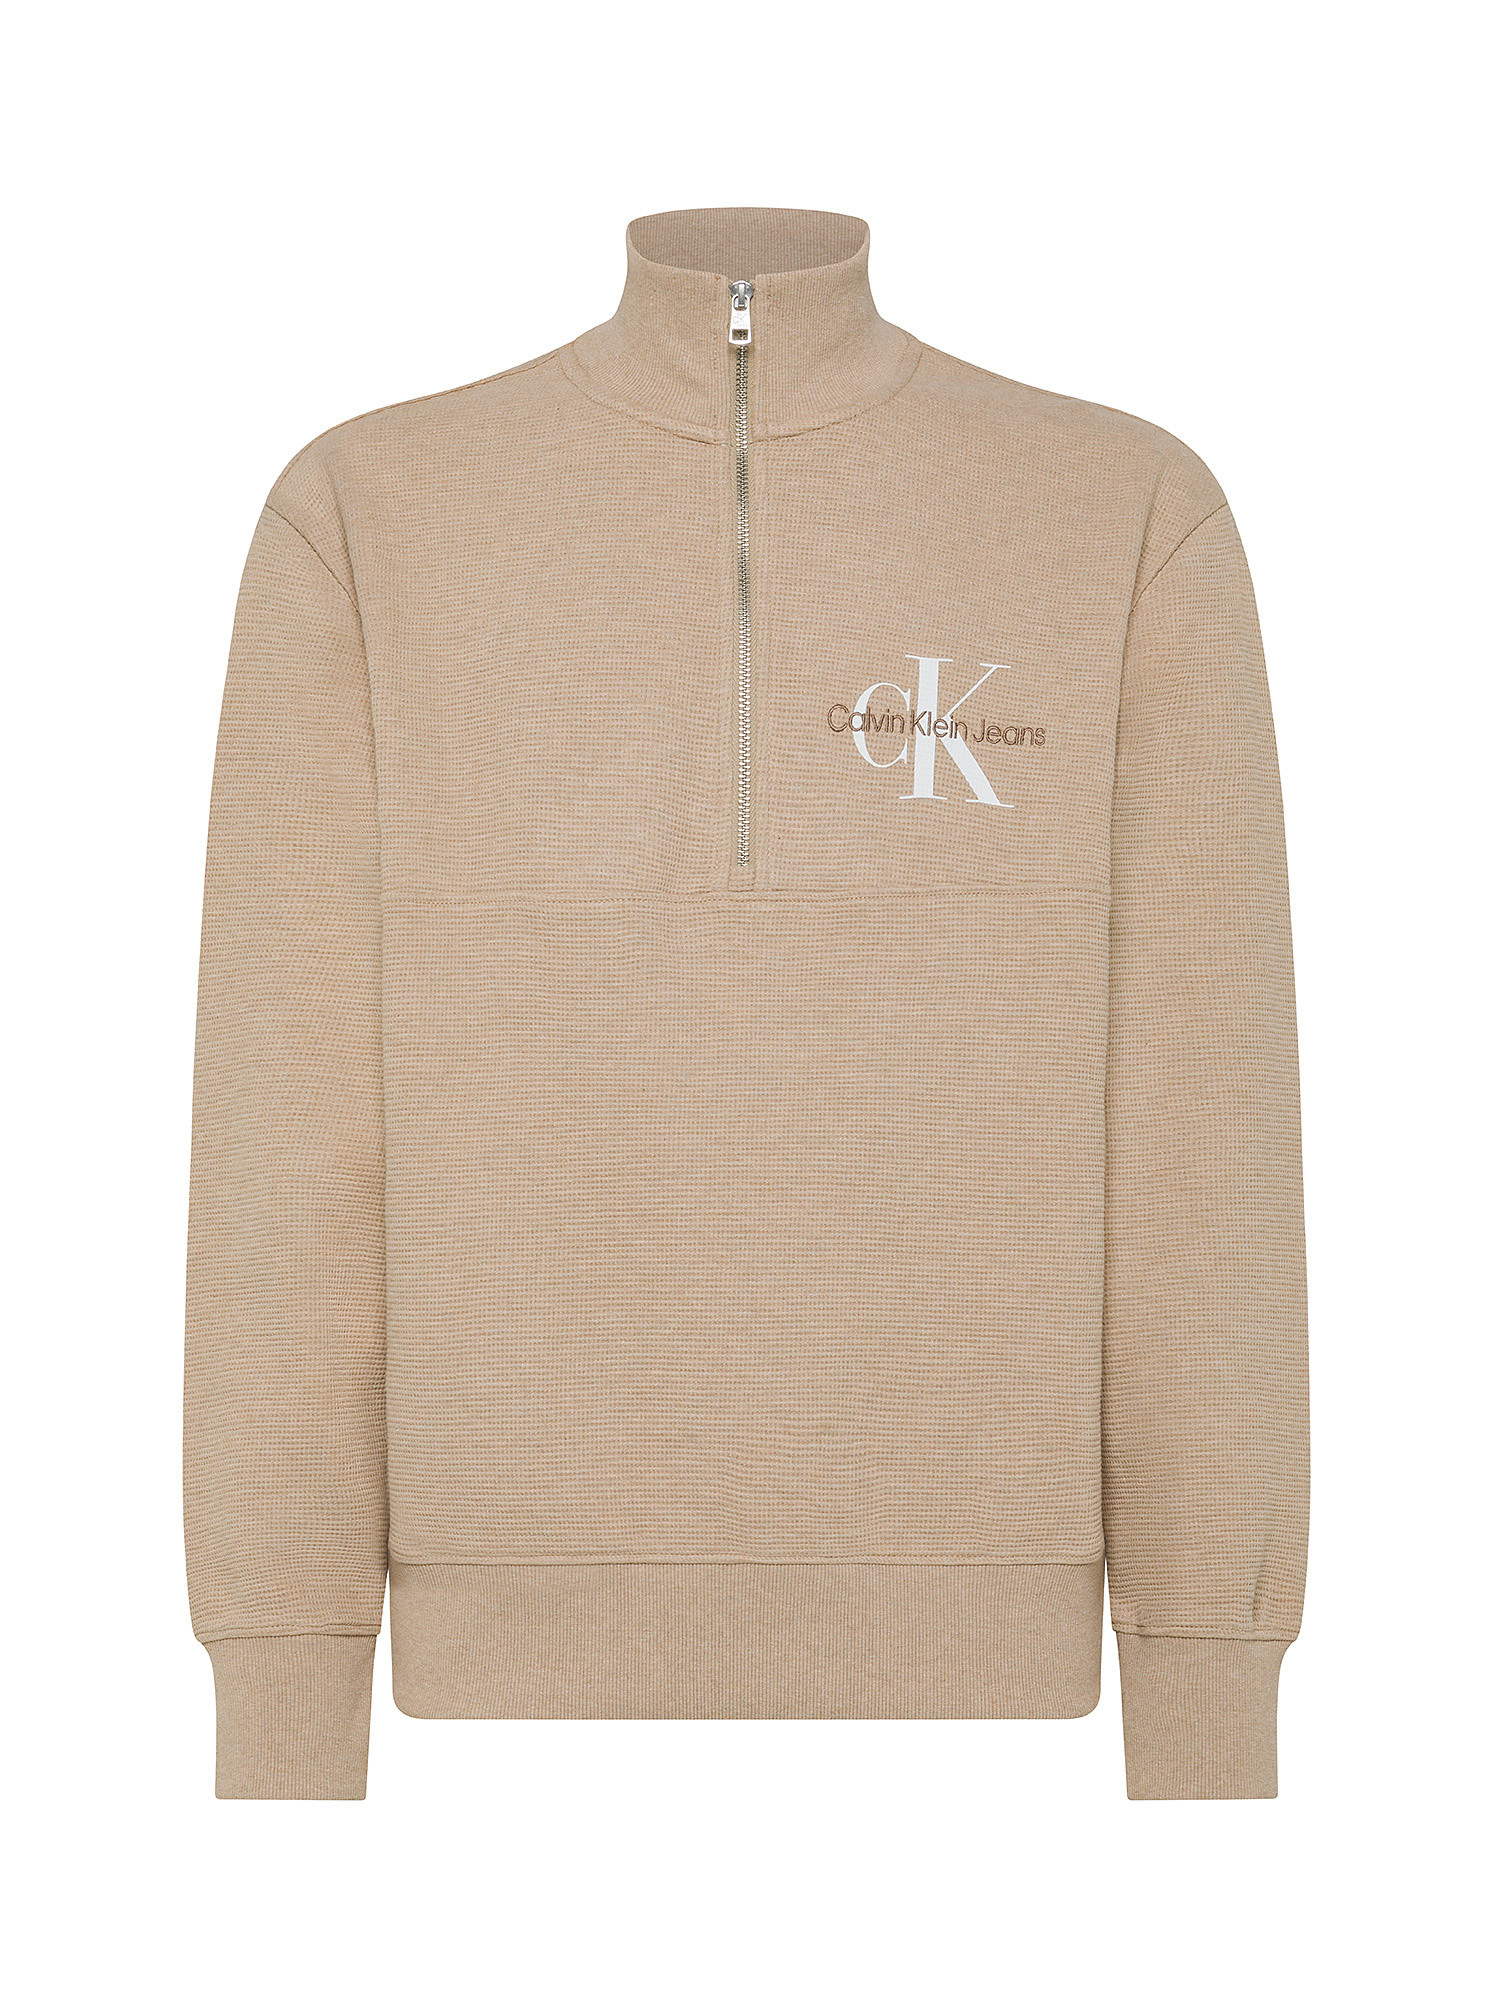 Calvin Klein Jeans -  Cotton sweatshirt with logo, Sand, large image number 0